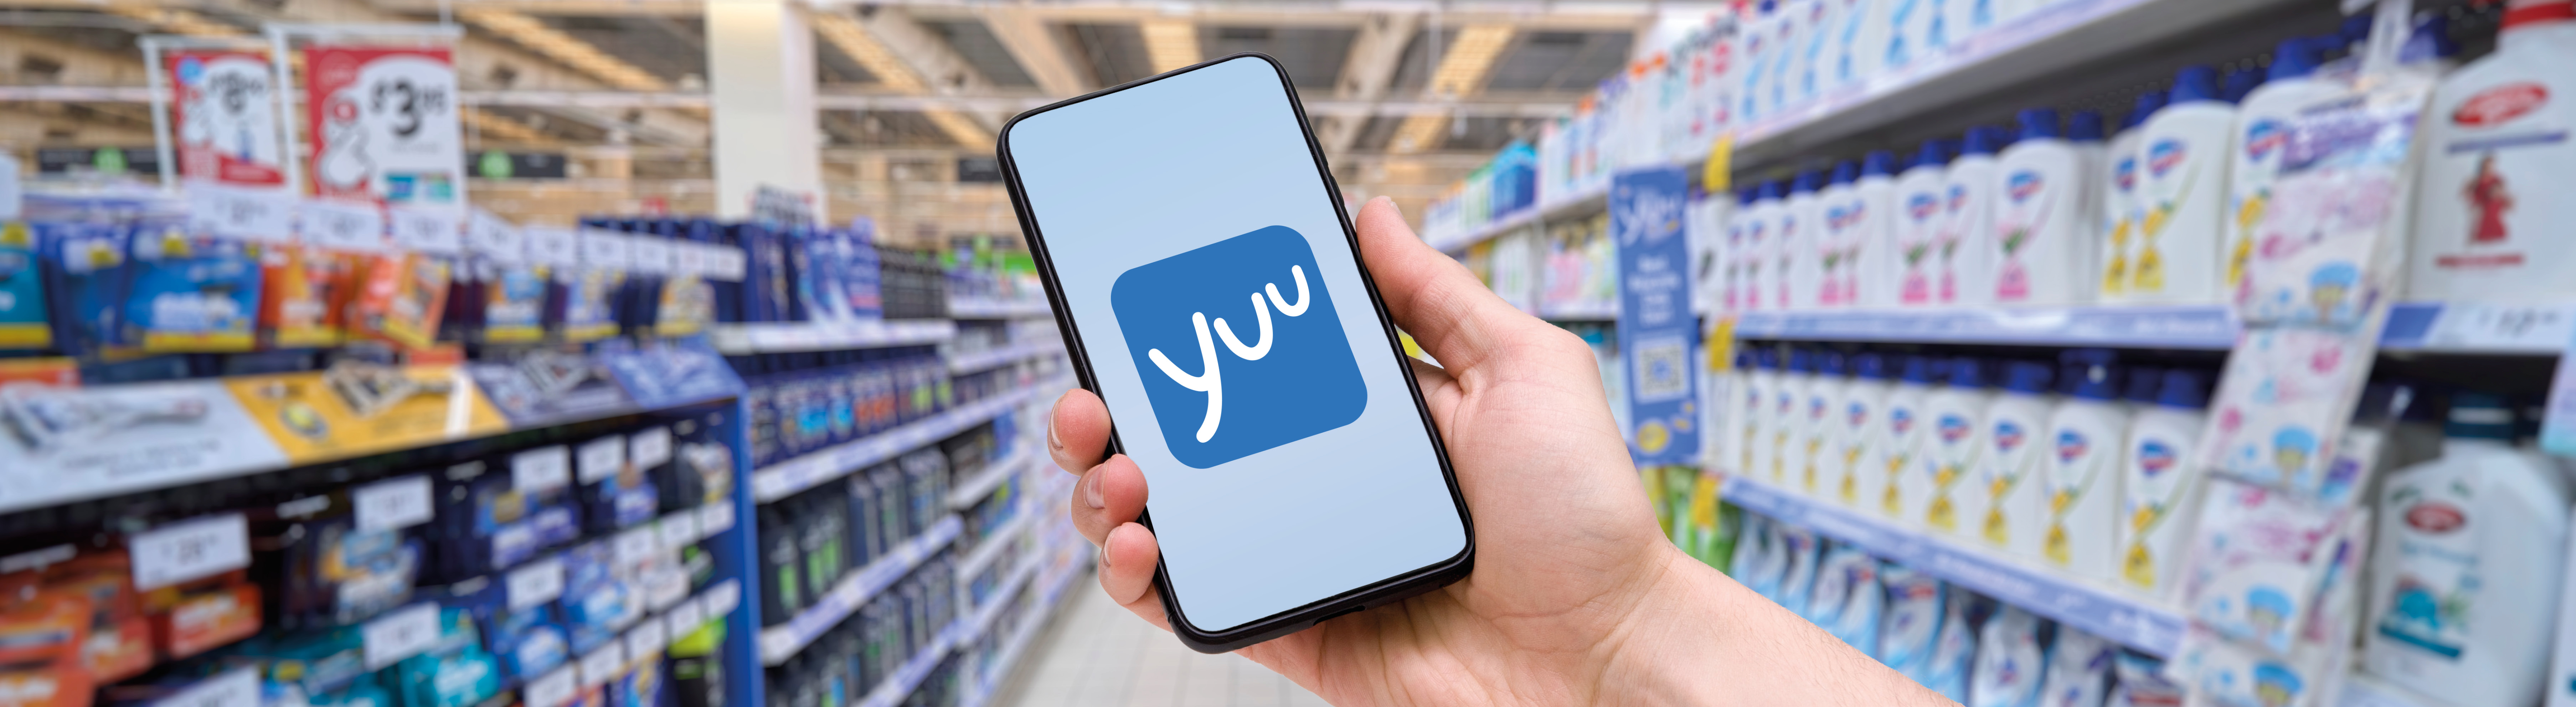 Hand holding a mobile with Yuu logo in display